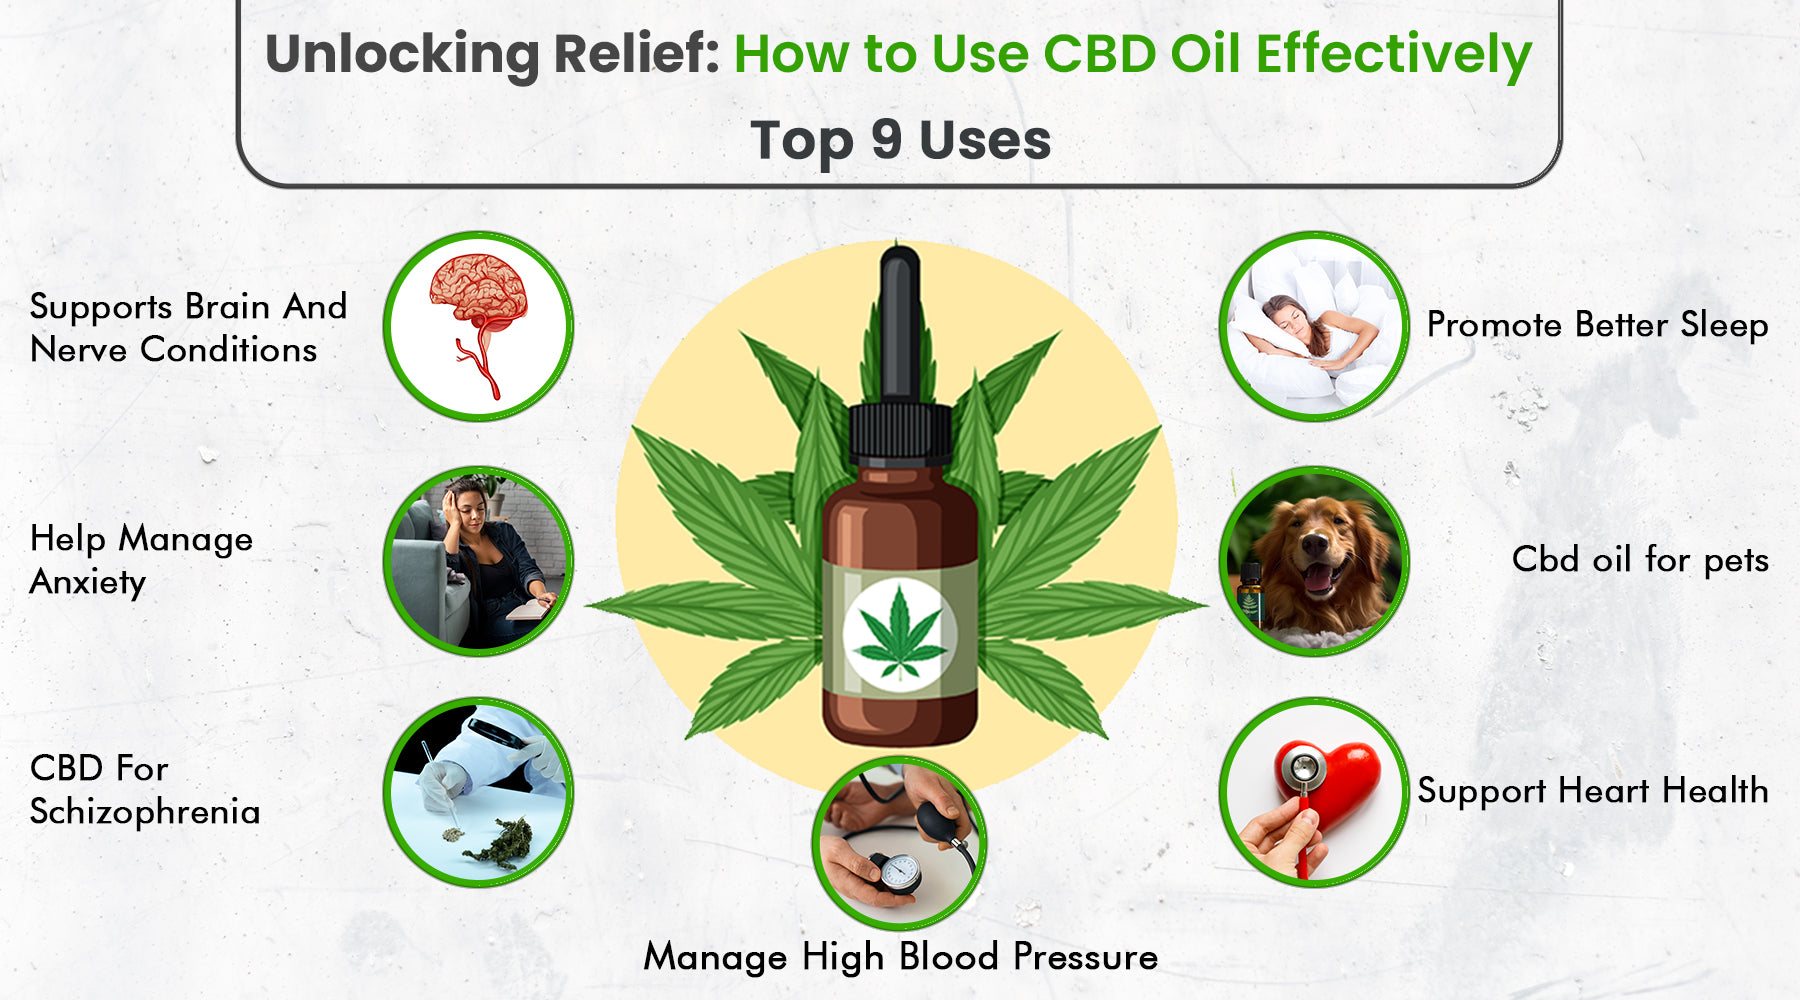  Unlocking Relief: How to Use CBD Oil Effectively - Top 9 Uses